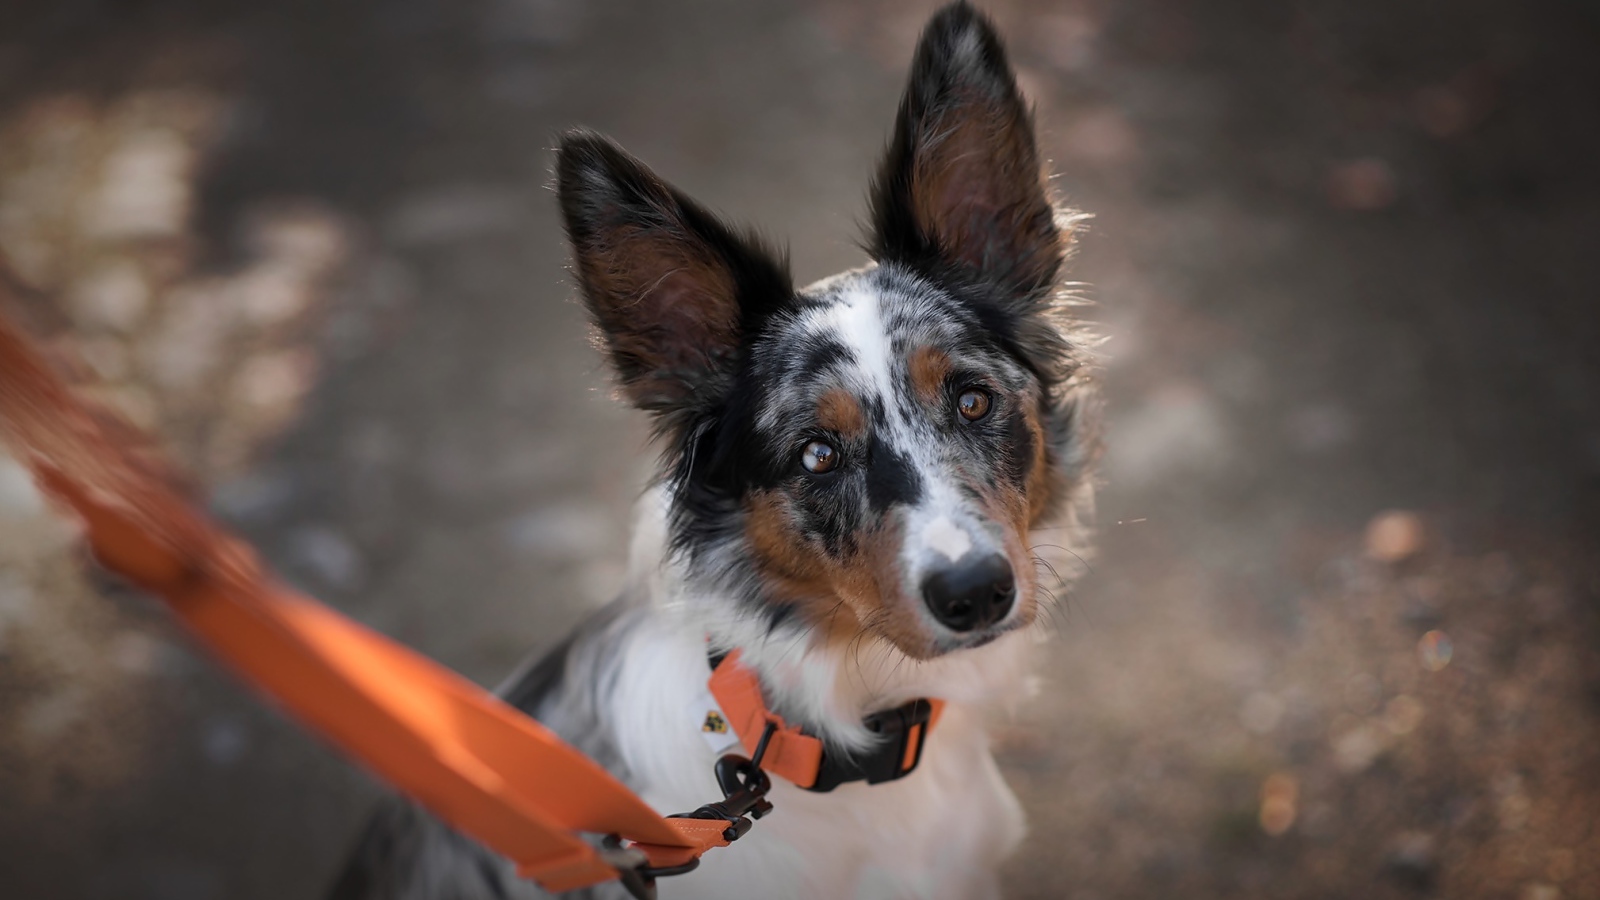 Sad look of a Border Collie breed dog on a leash